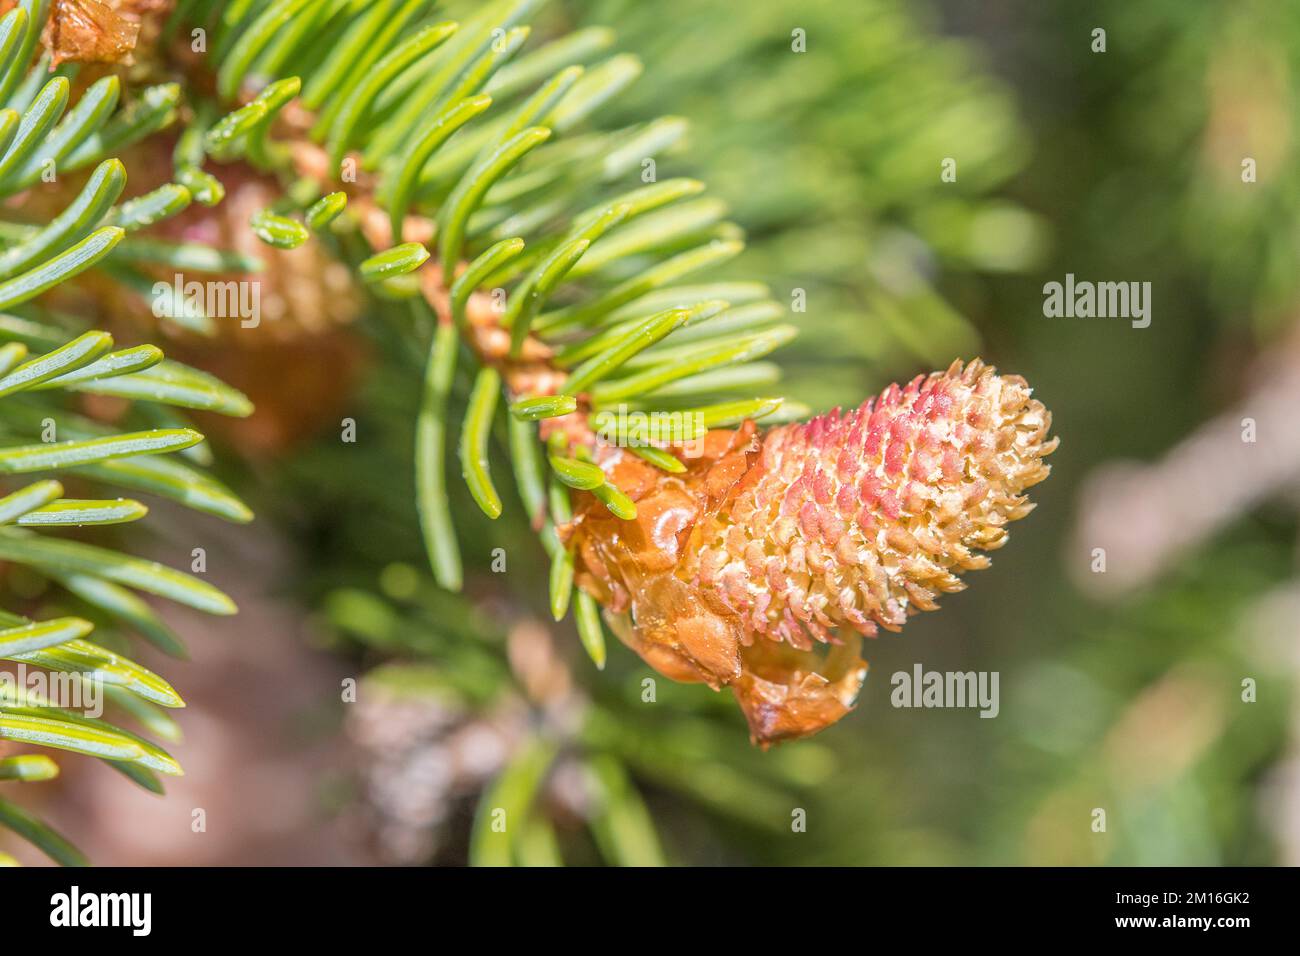 Abies alba, the European silver fir or silver fir, is a fir native to the mountains of Europe, male flower. Stock Photo